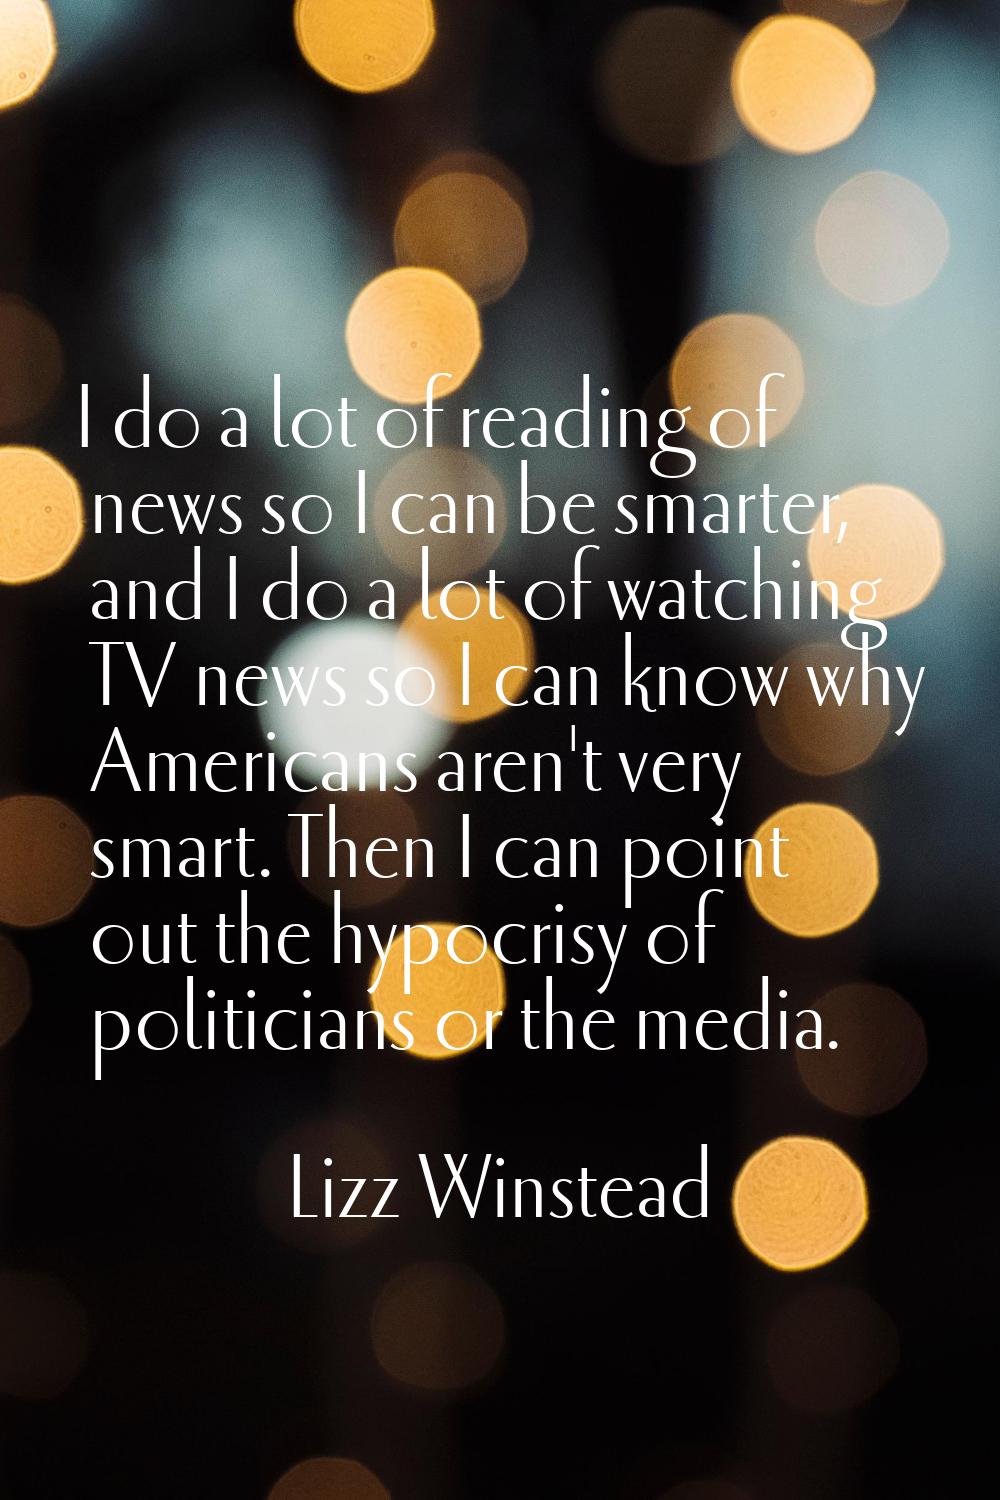 I do a lot of reading of news so I can be smarter, and I do a lot of watching TV news so I can know